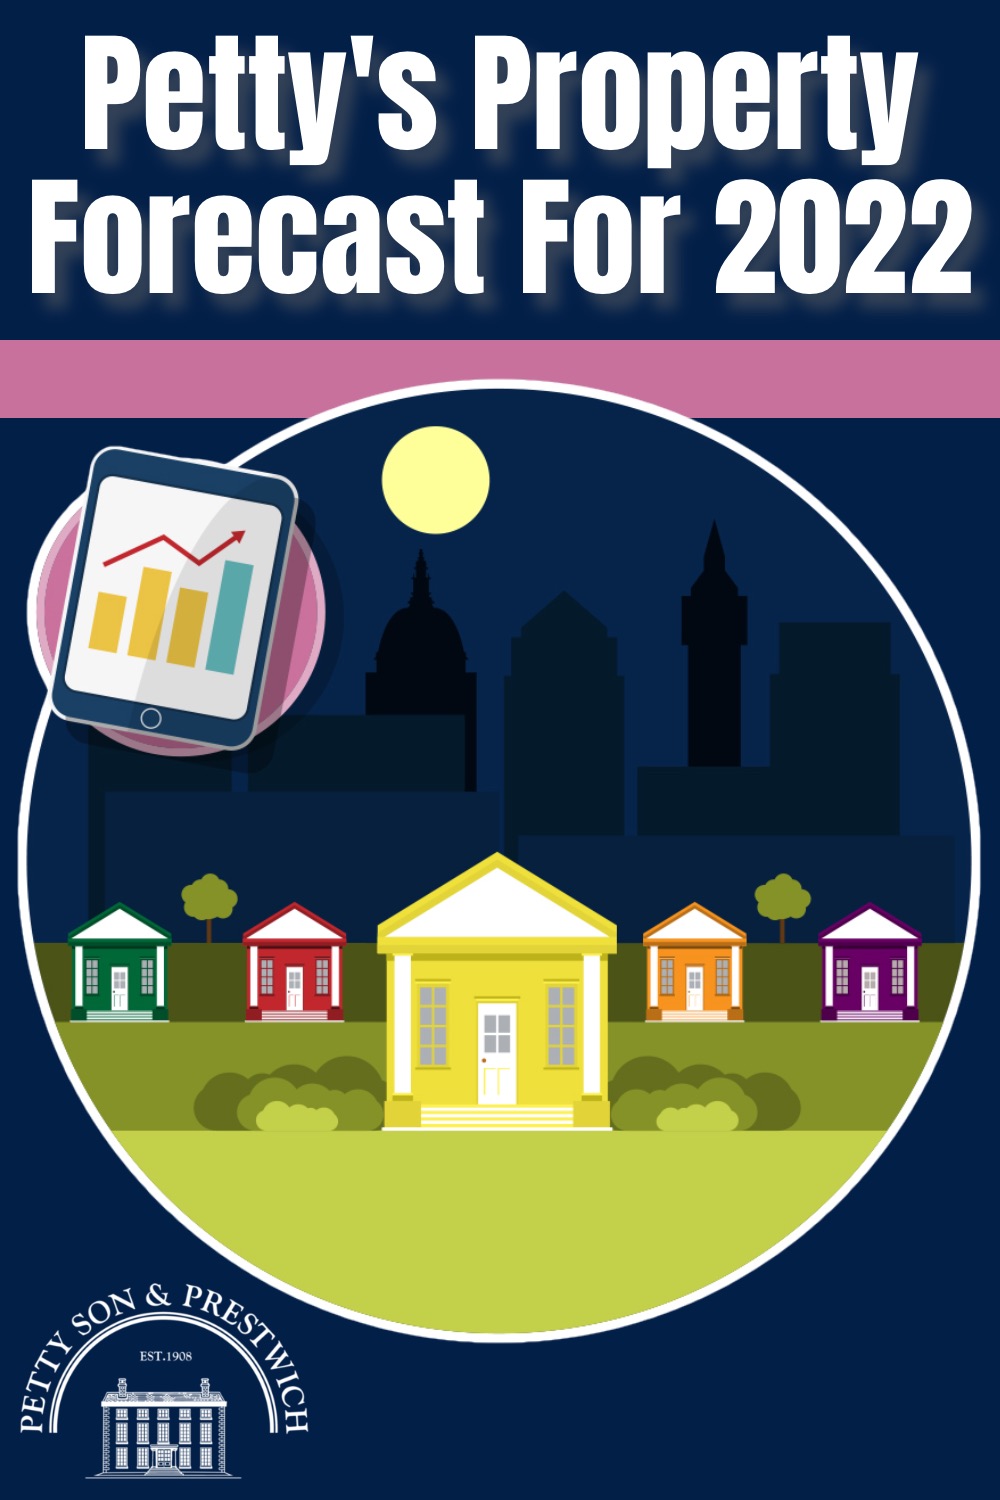 what will happen to property prices 2022